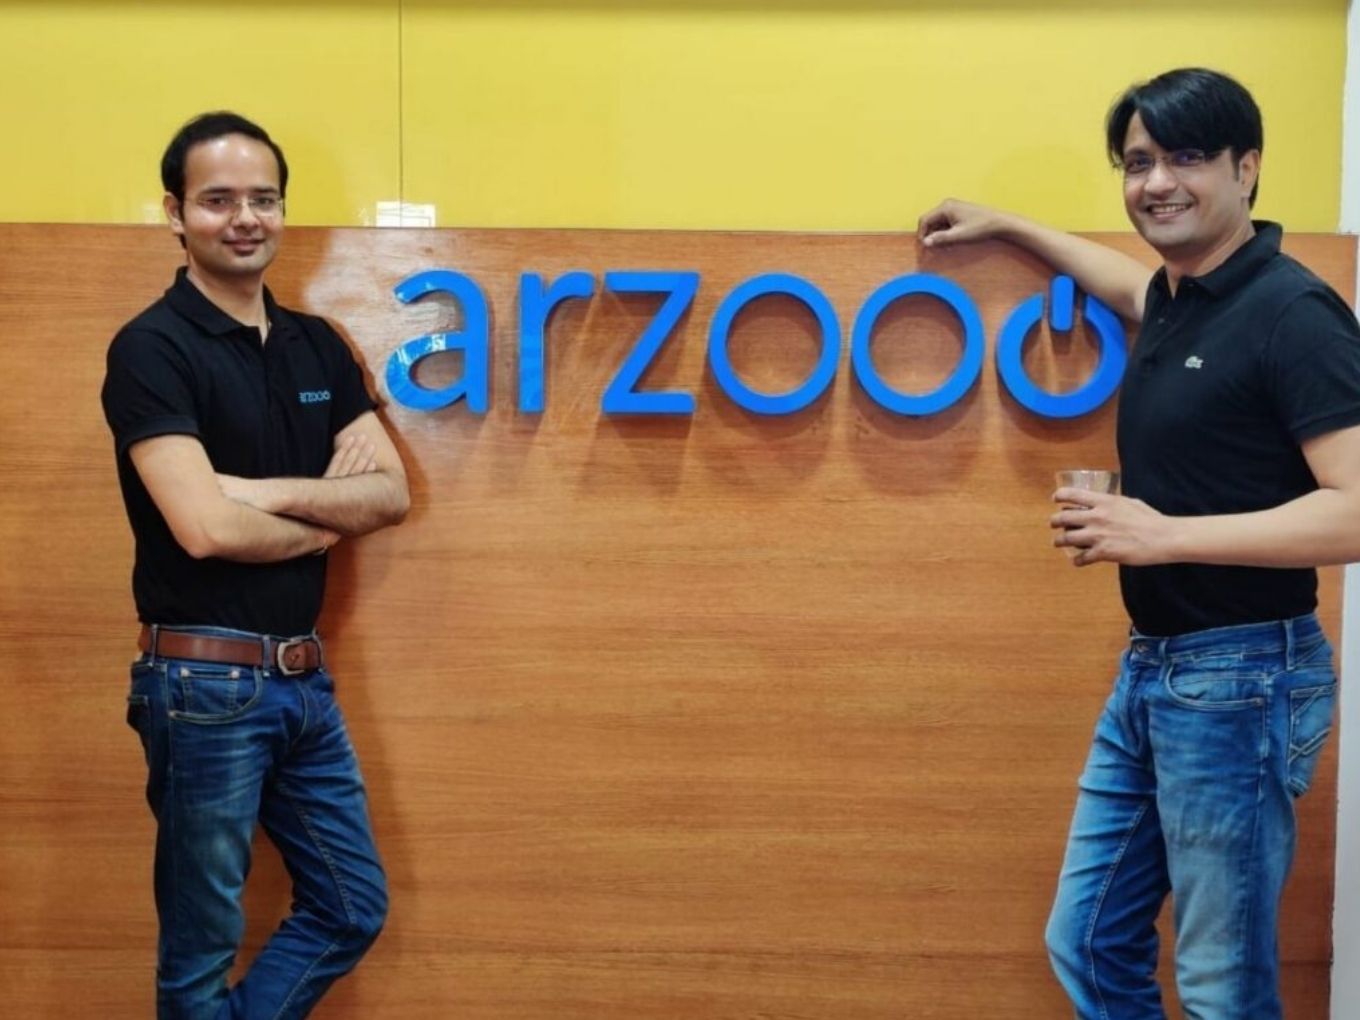 Retail Tech Startup Arzoo Raises Funding To Ramp Up ‘Go Store’